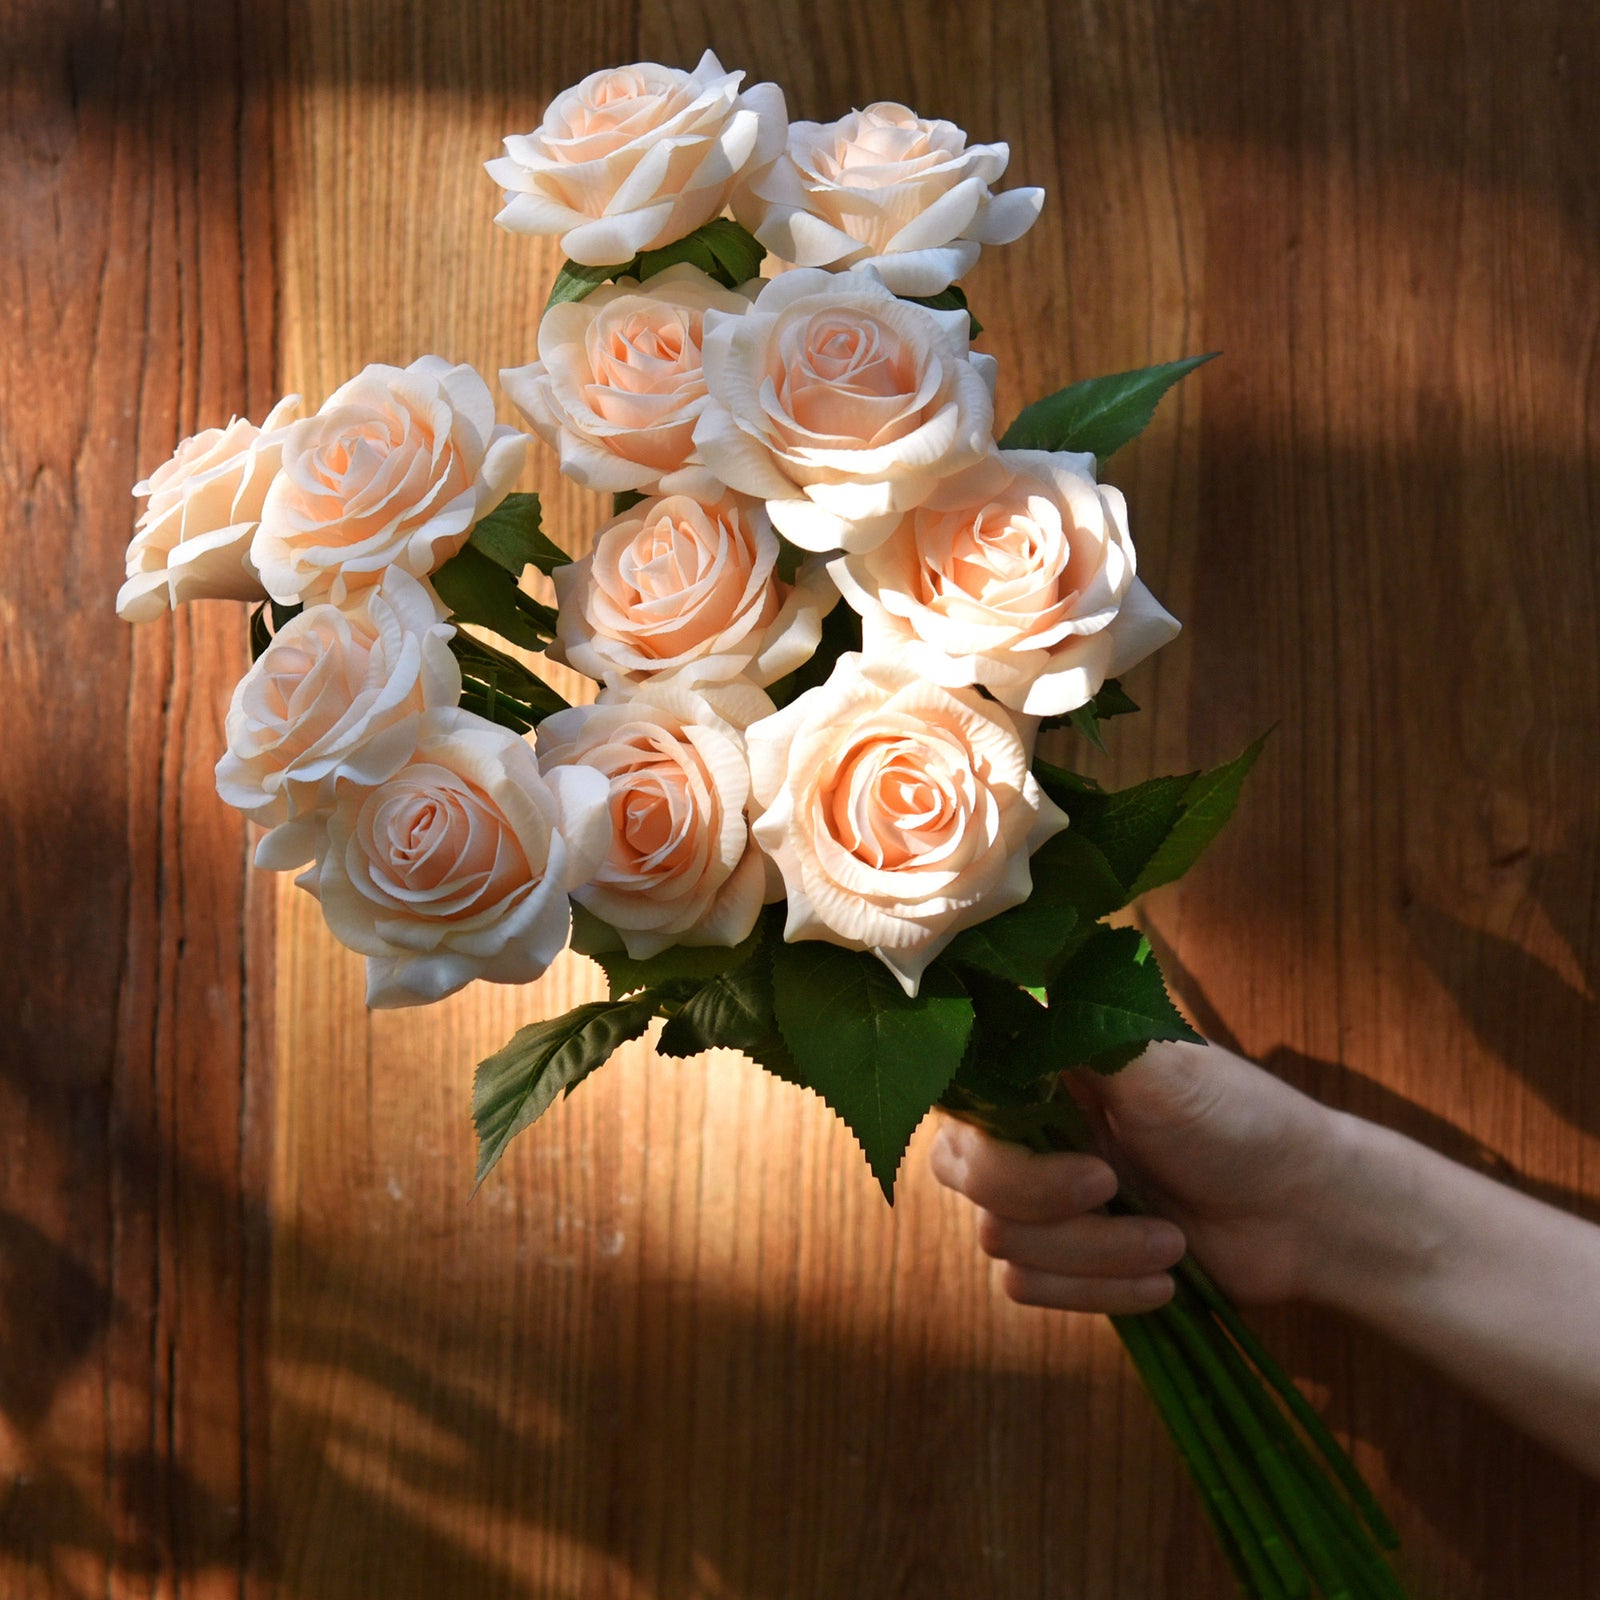 Apricot Pink Real Touch Roses Silk Artificial Flowers ‘Petals Feel and Look like Fresh Roses' 10 Stems